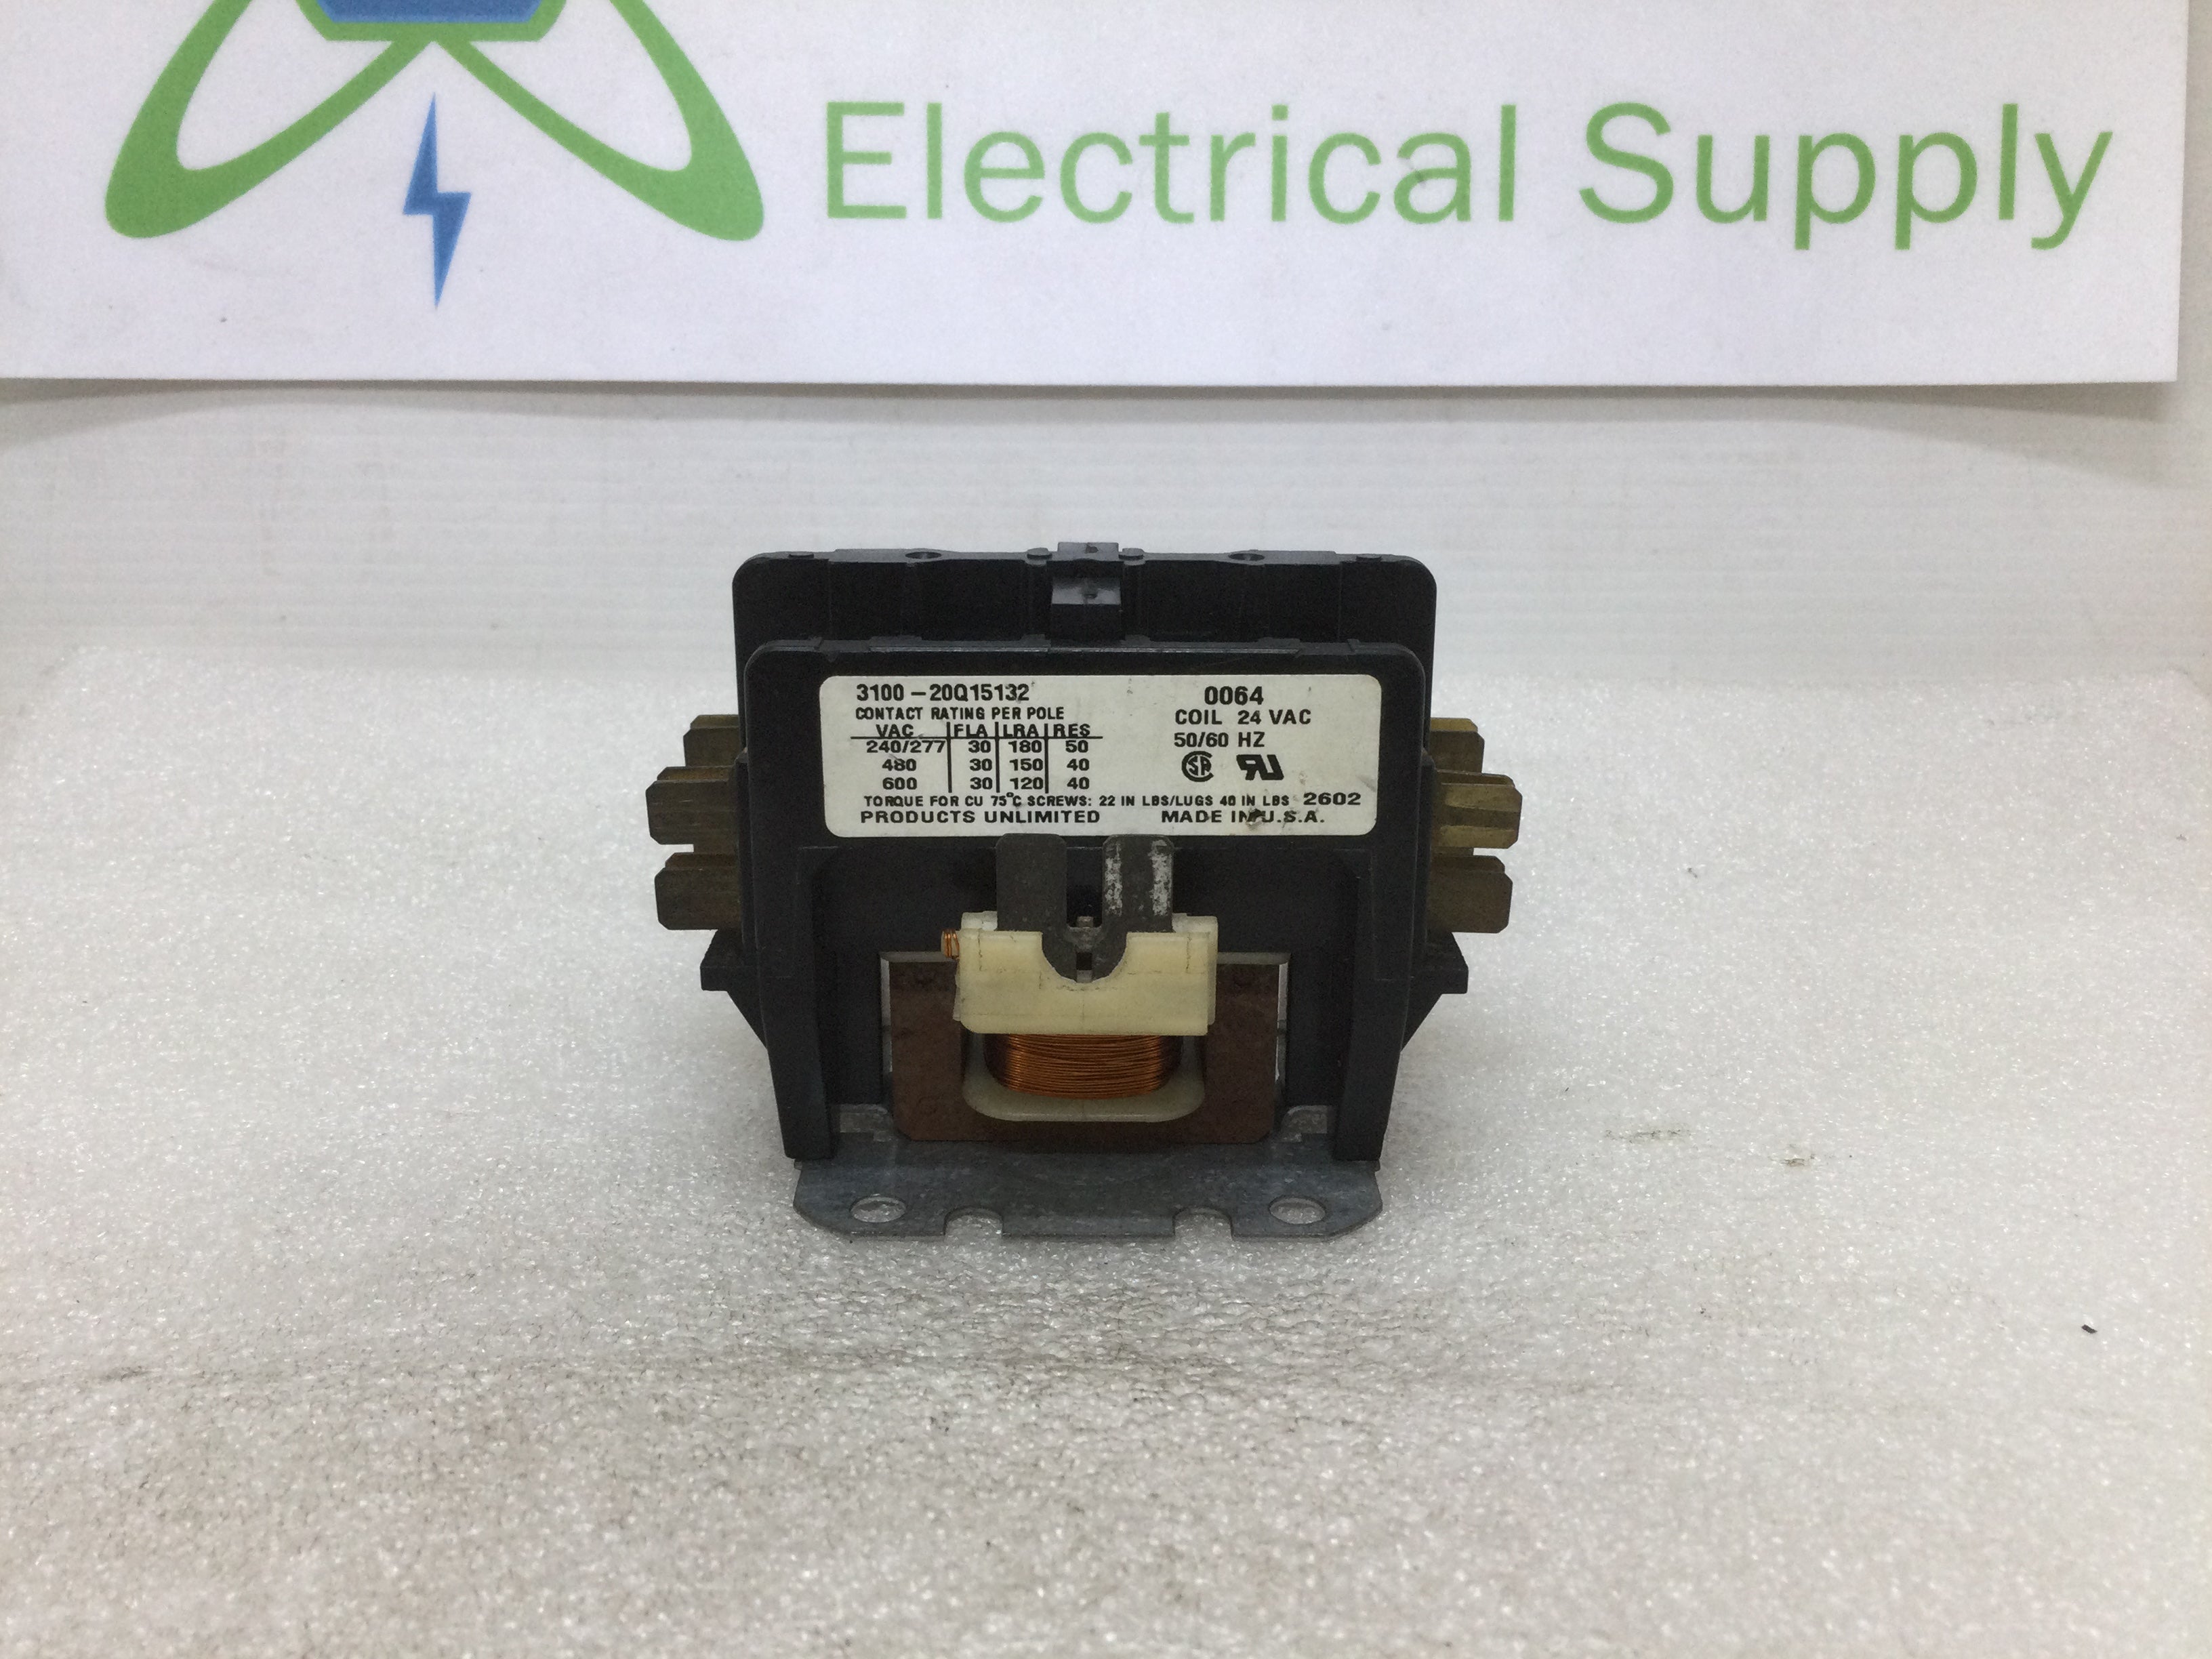 TSC Products Unlimited 3100-30T1628TW HN53HE122 50 FLA 120 VAC Coil Contactor 